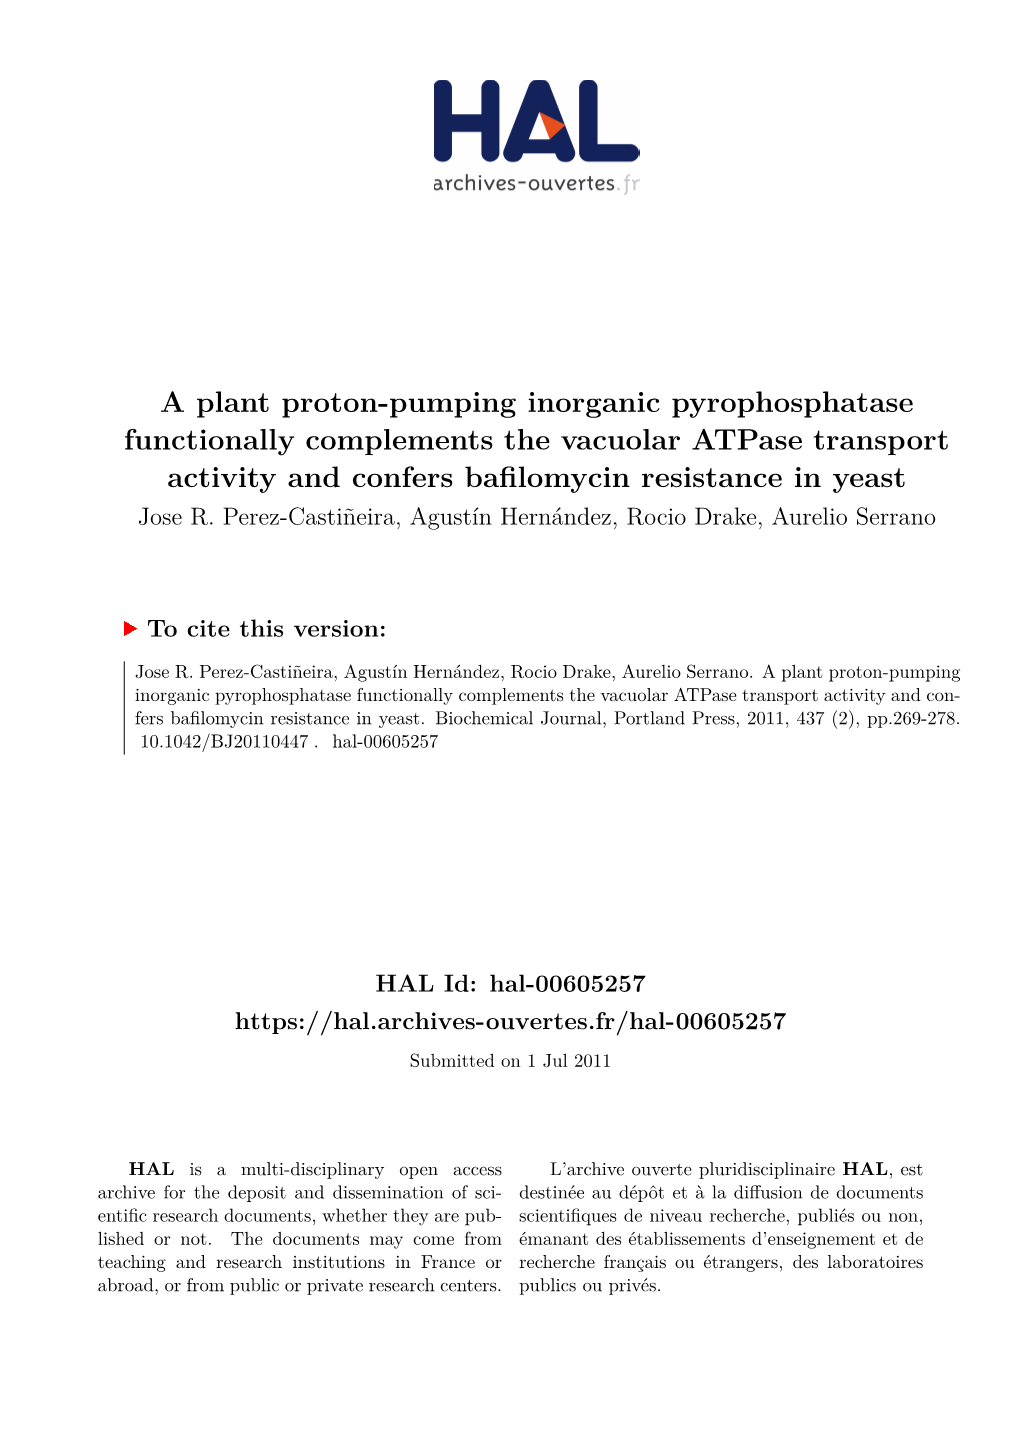 A Plant Proton-Pumping Inorganic Pyrophosphatase Functionally Complements the Vacuolar Atpase Transport Activity and Confers Bafilomycin Resistance in Yeast Jose R